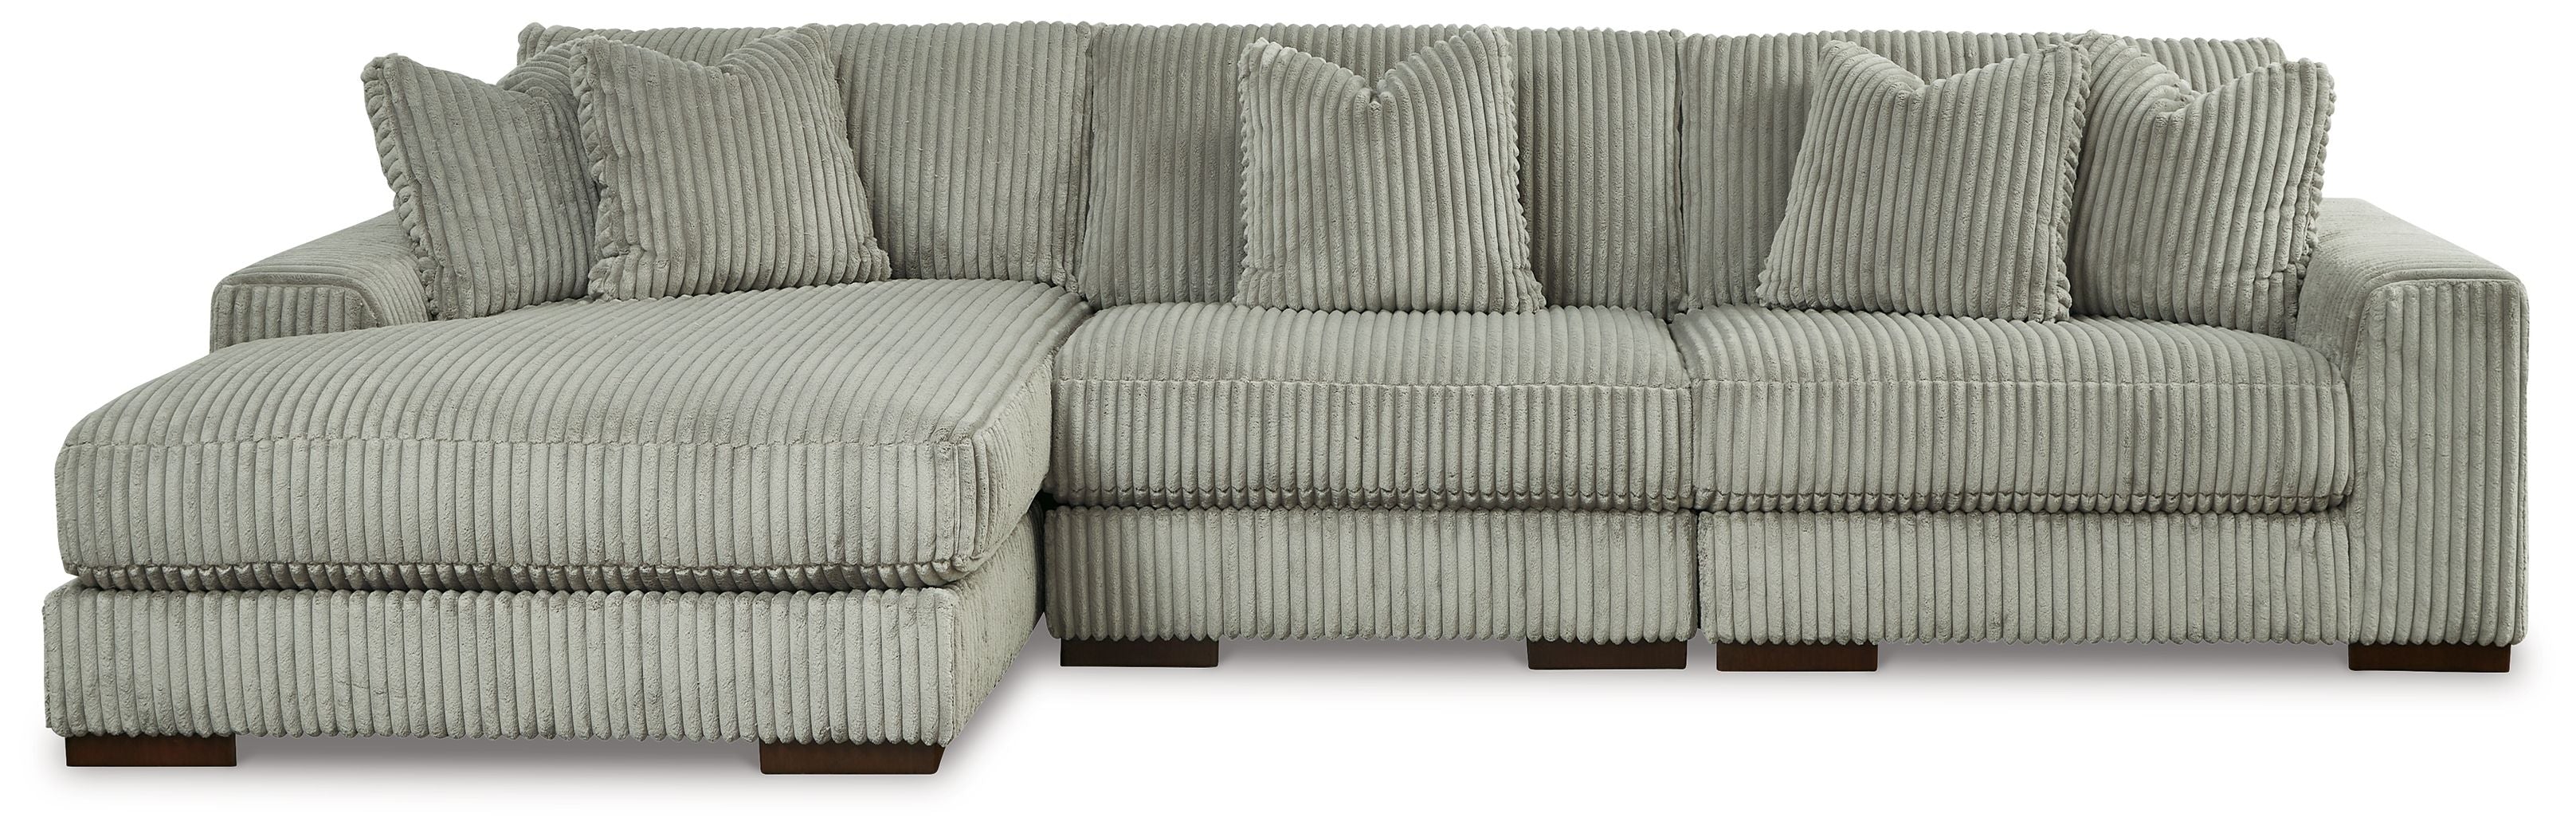 lindyn-sectional